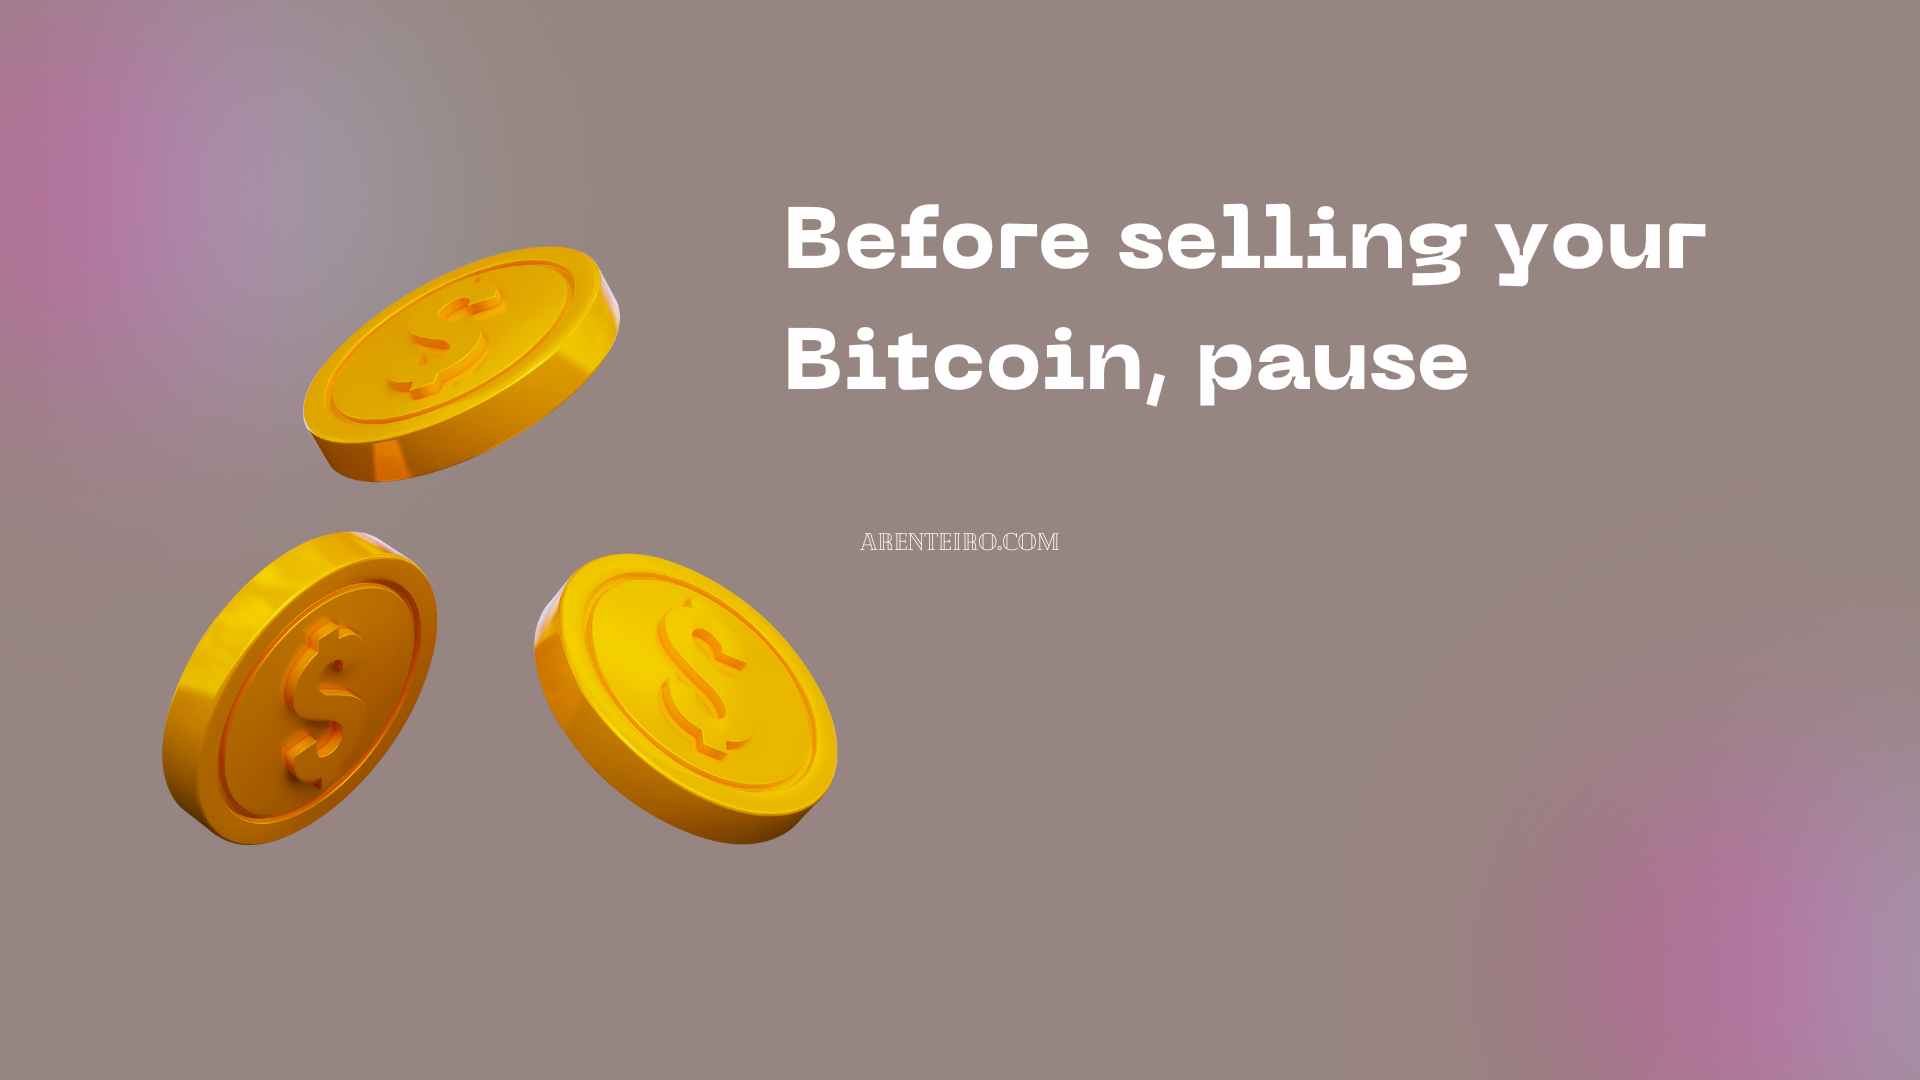 Before selling your Bitcoin, pause